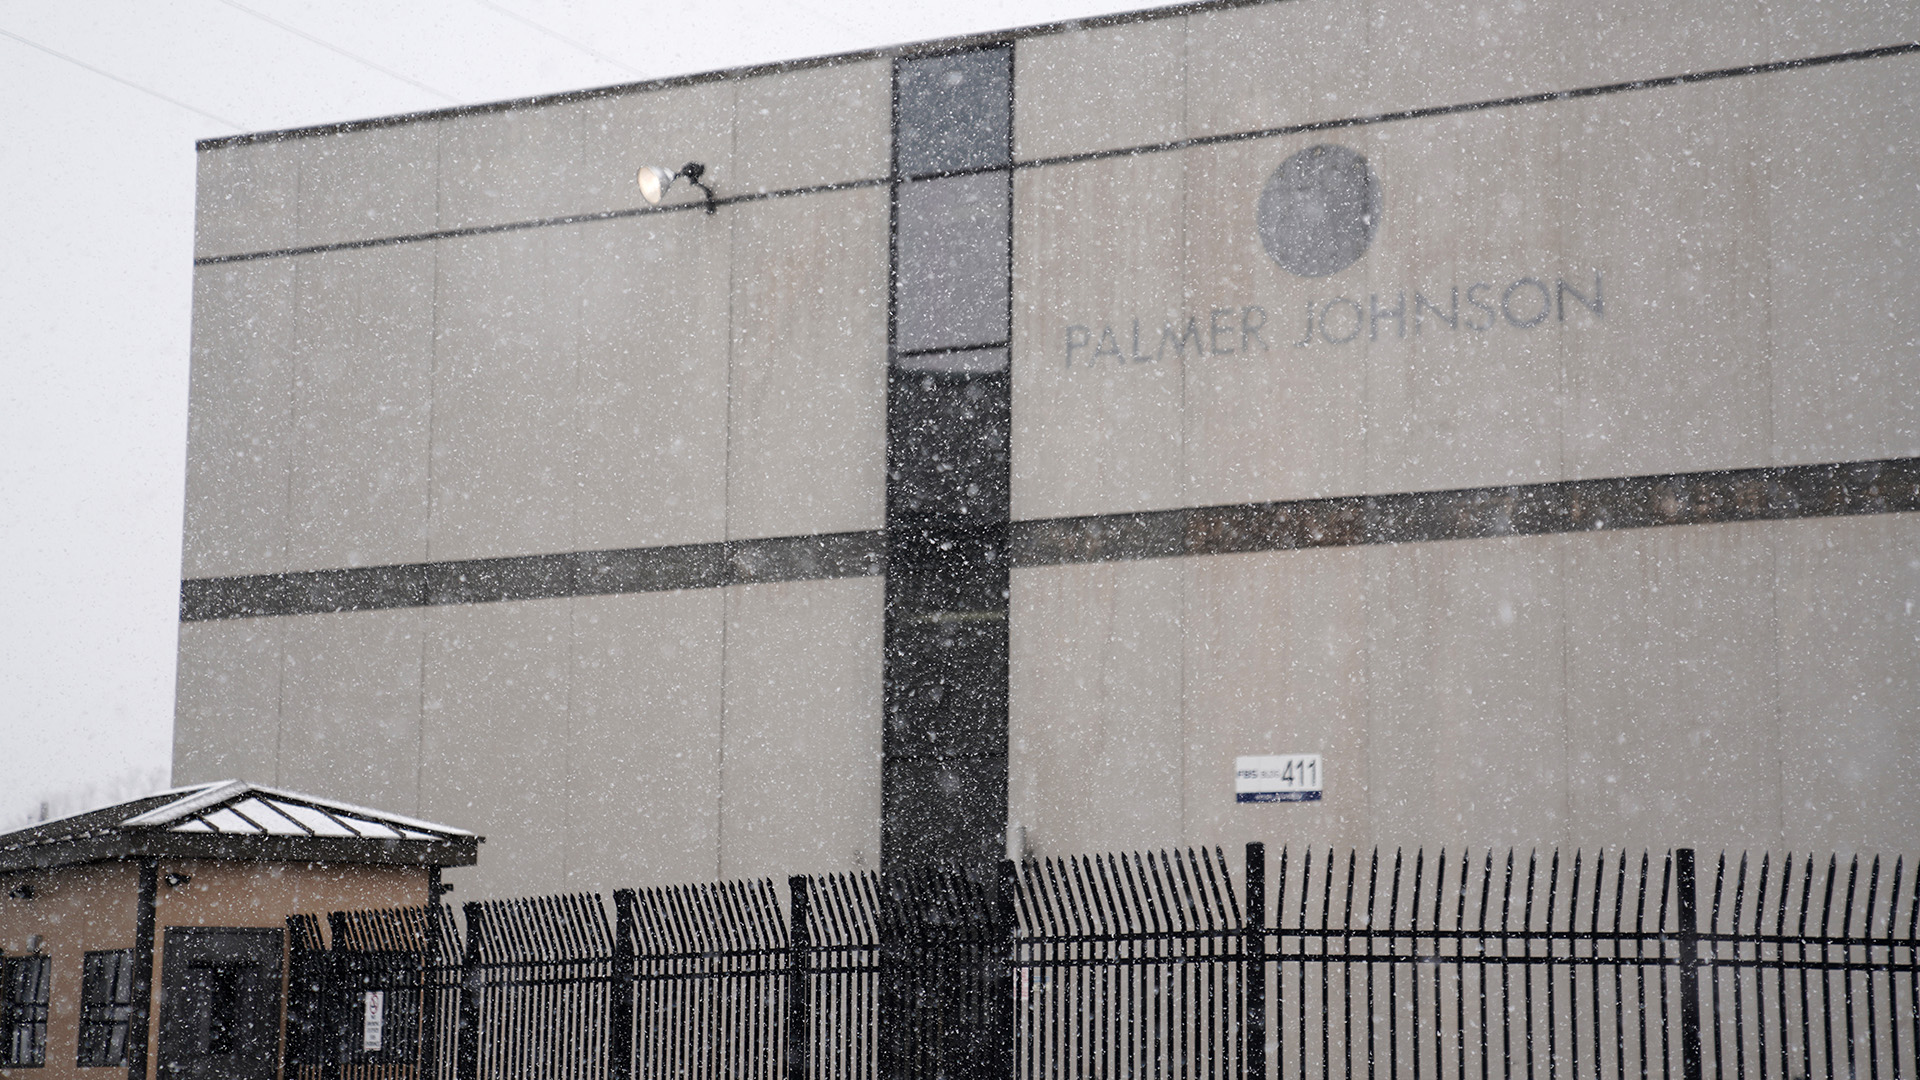 A multistory building is marked by discoloration where a logo and wordmark stating "Palmer Johnson" were formerly placed, with a guardhouse and wrought iron fence in the foreground and snow flying in the air.